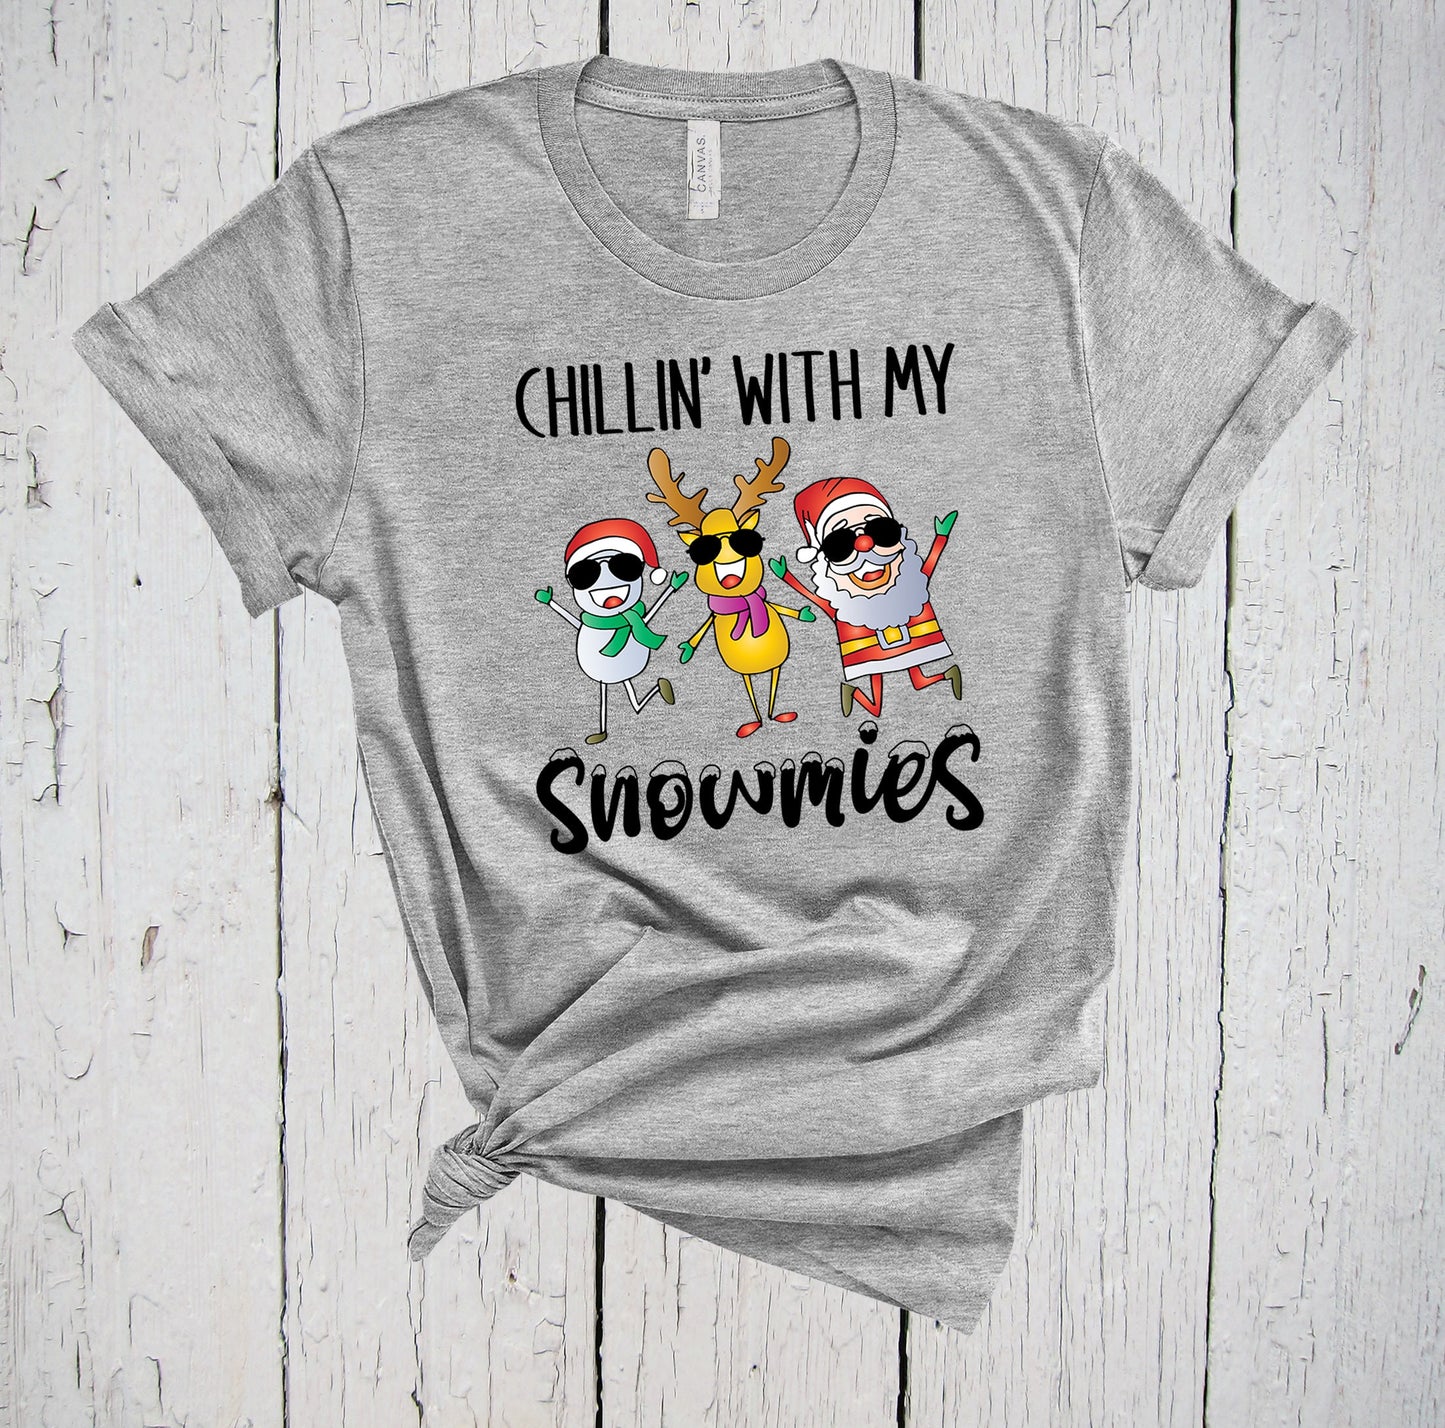 Chillin With My Snowmies, Christmas T Shirt, Let It Snow, Snowman, Reindeer, Santa Claus, Holiday Shirt, Christmas Party, Christmas Shirts